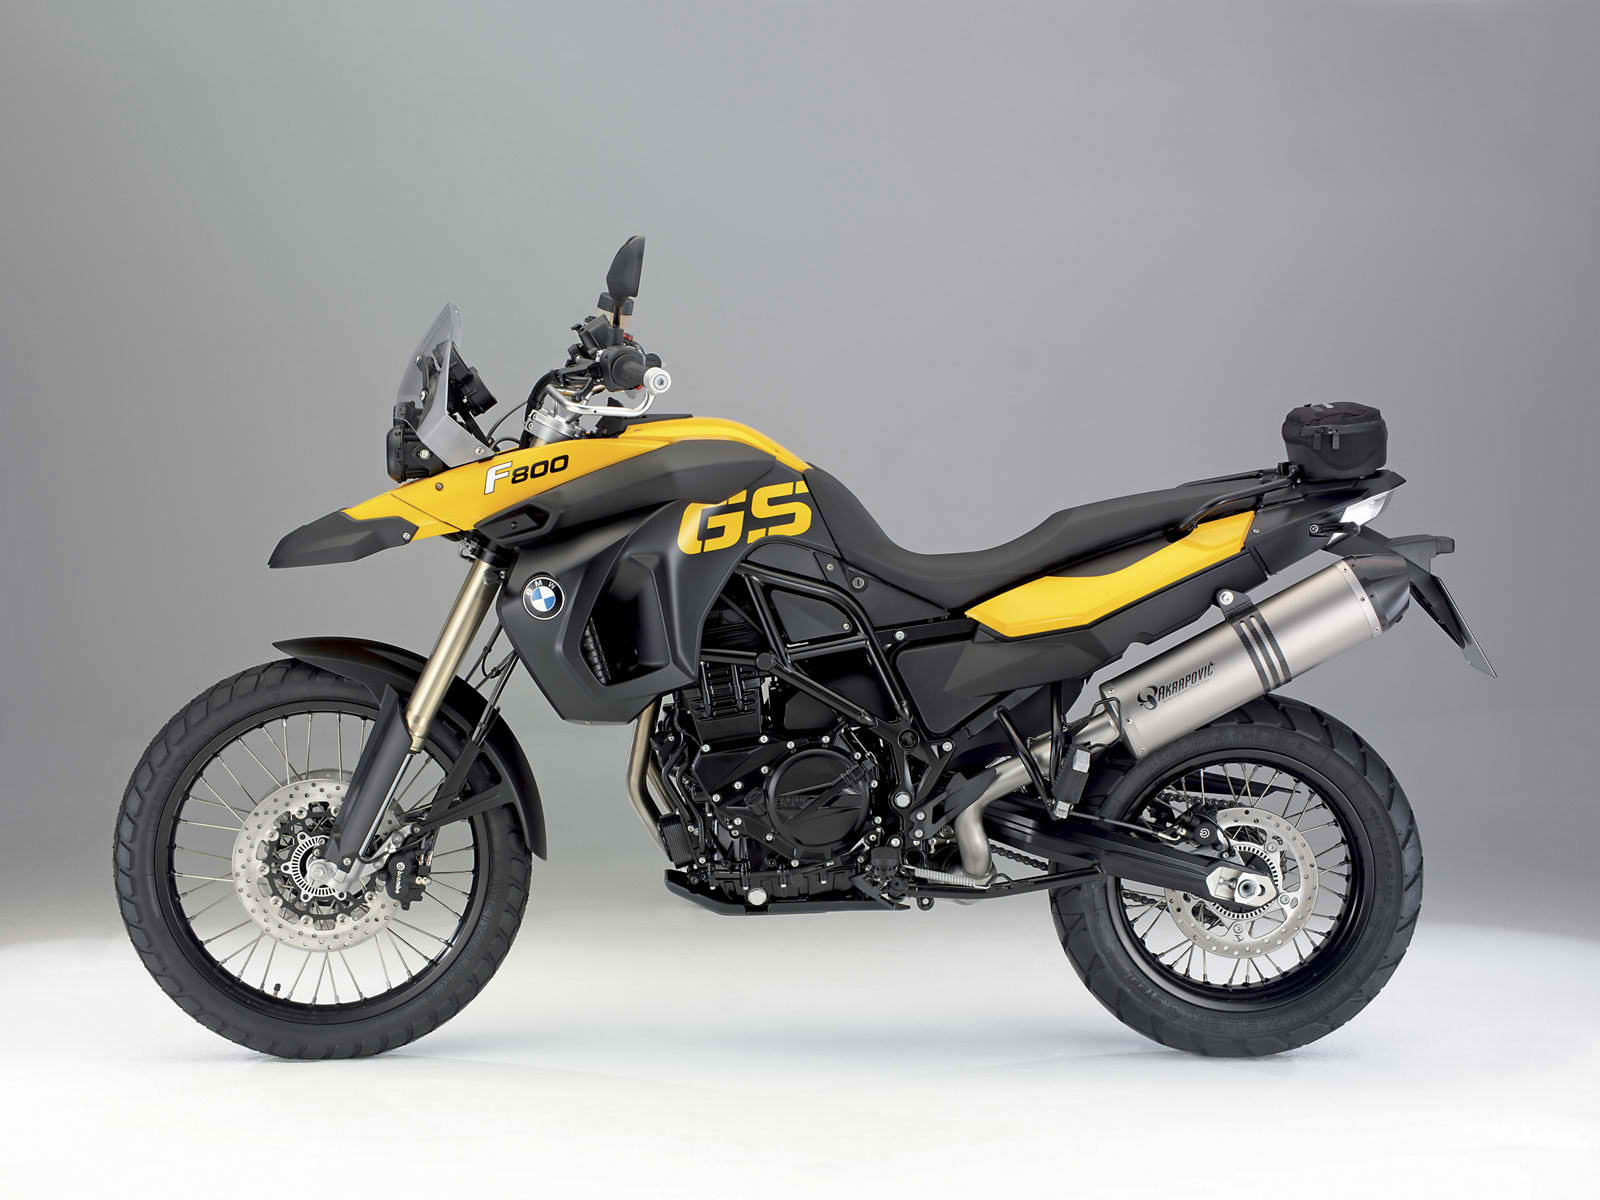 The BMW F 800 GS 2010 is accessible in Lava Orange Metallic/Black Satin and 